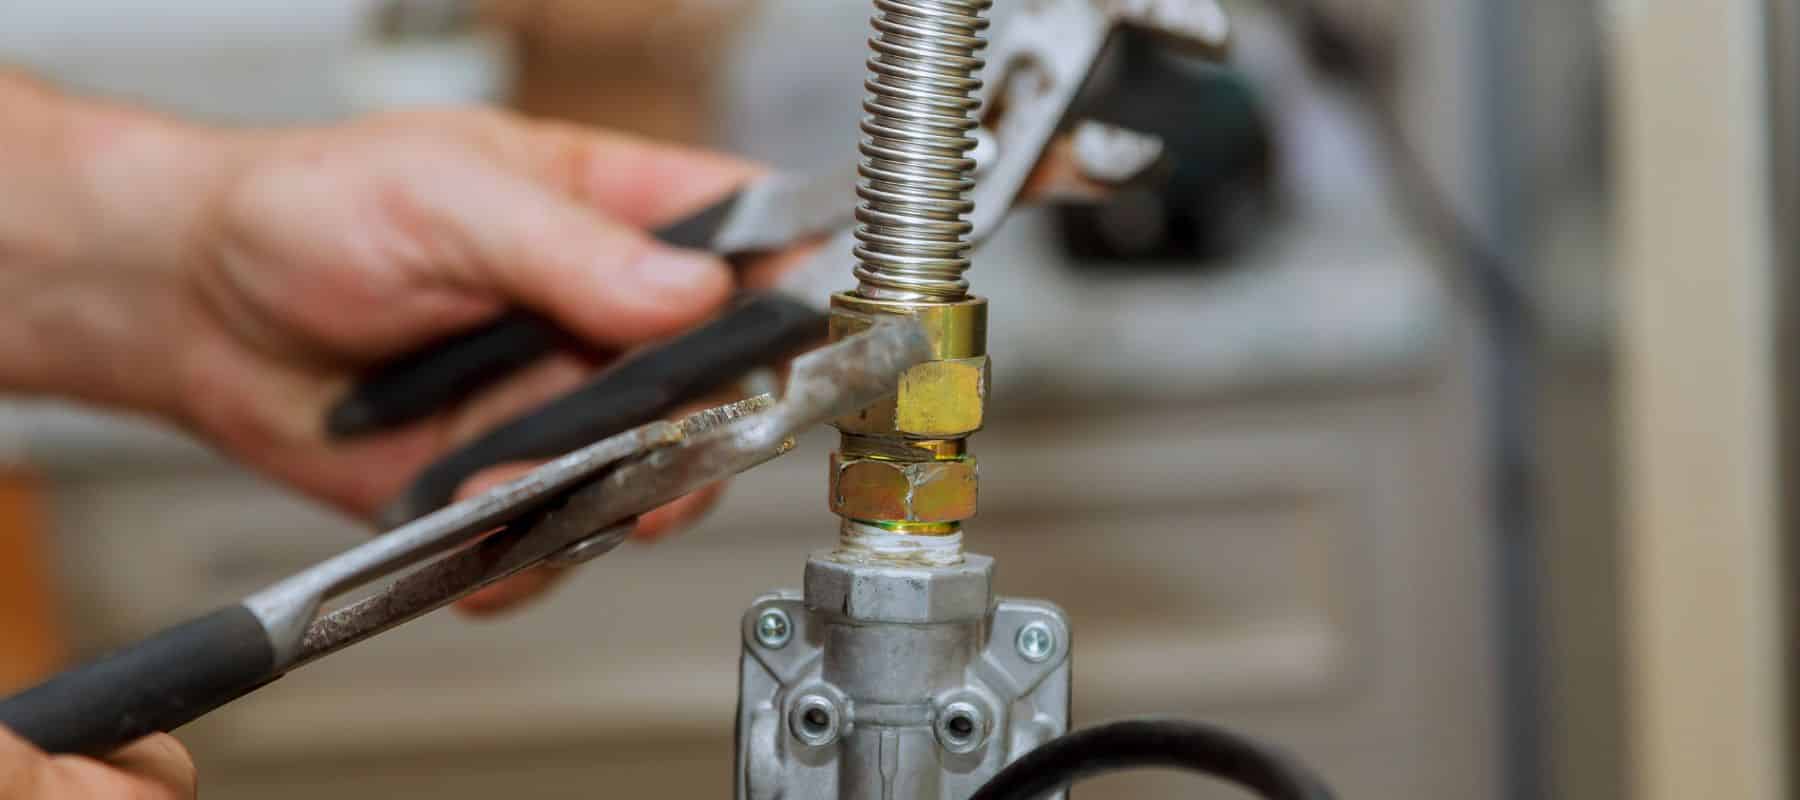 closeup of a plumber hands holding two wrenches tightening a section on plumbing pipes